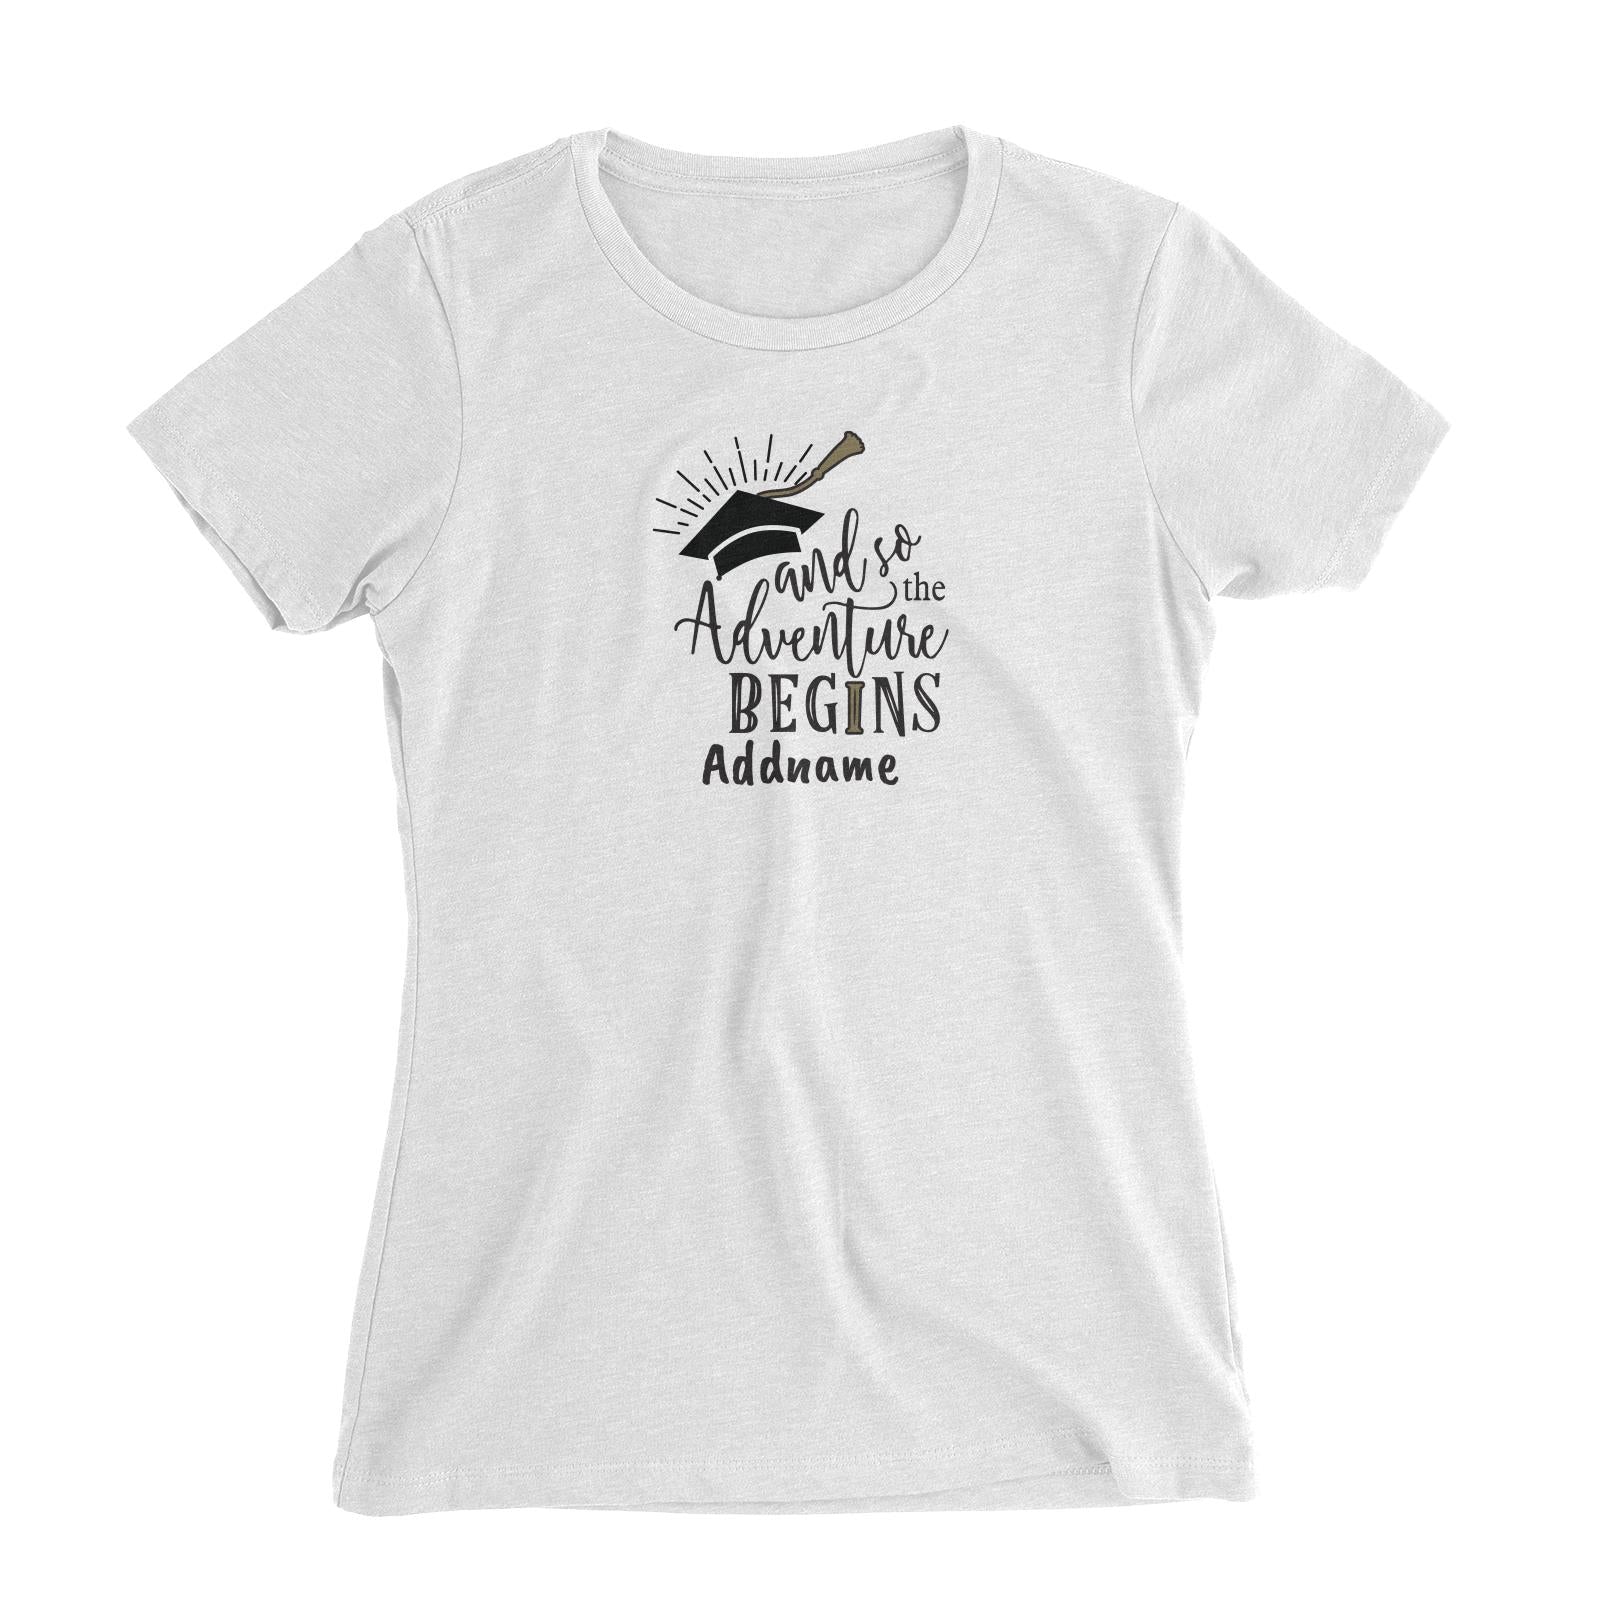 Graduation Series And So The Adventure Begins Women's Slim Fit T-Shirt